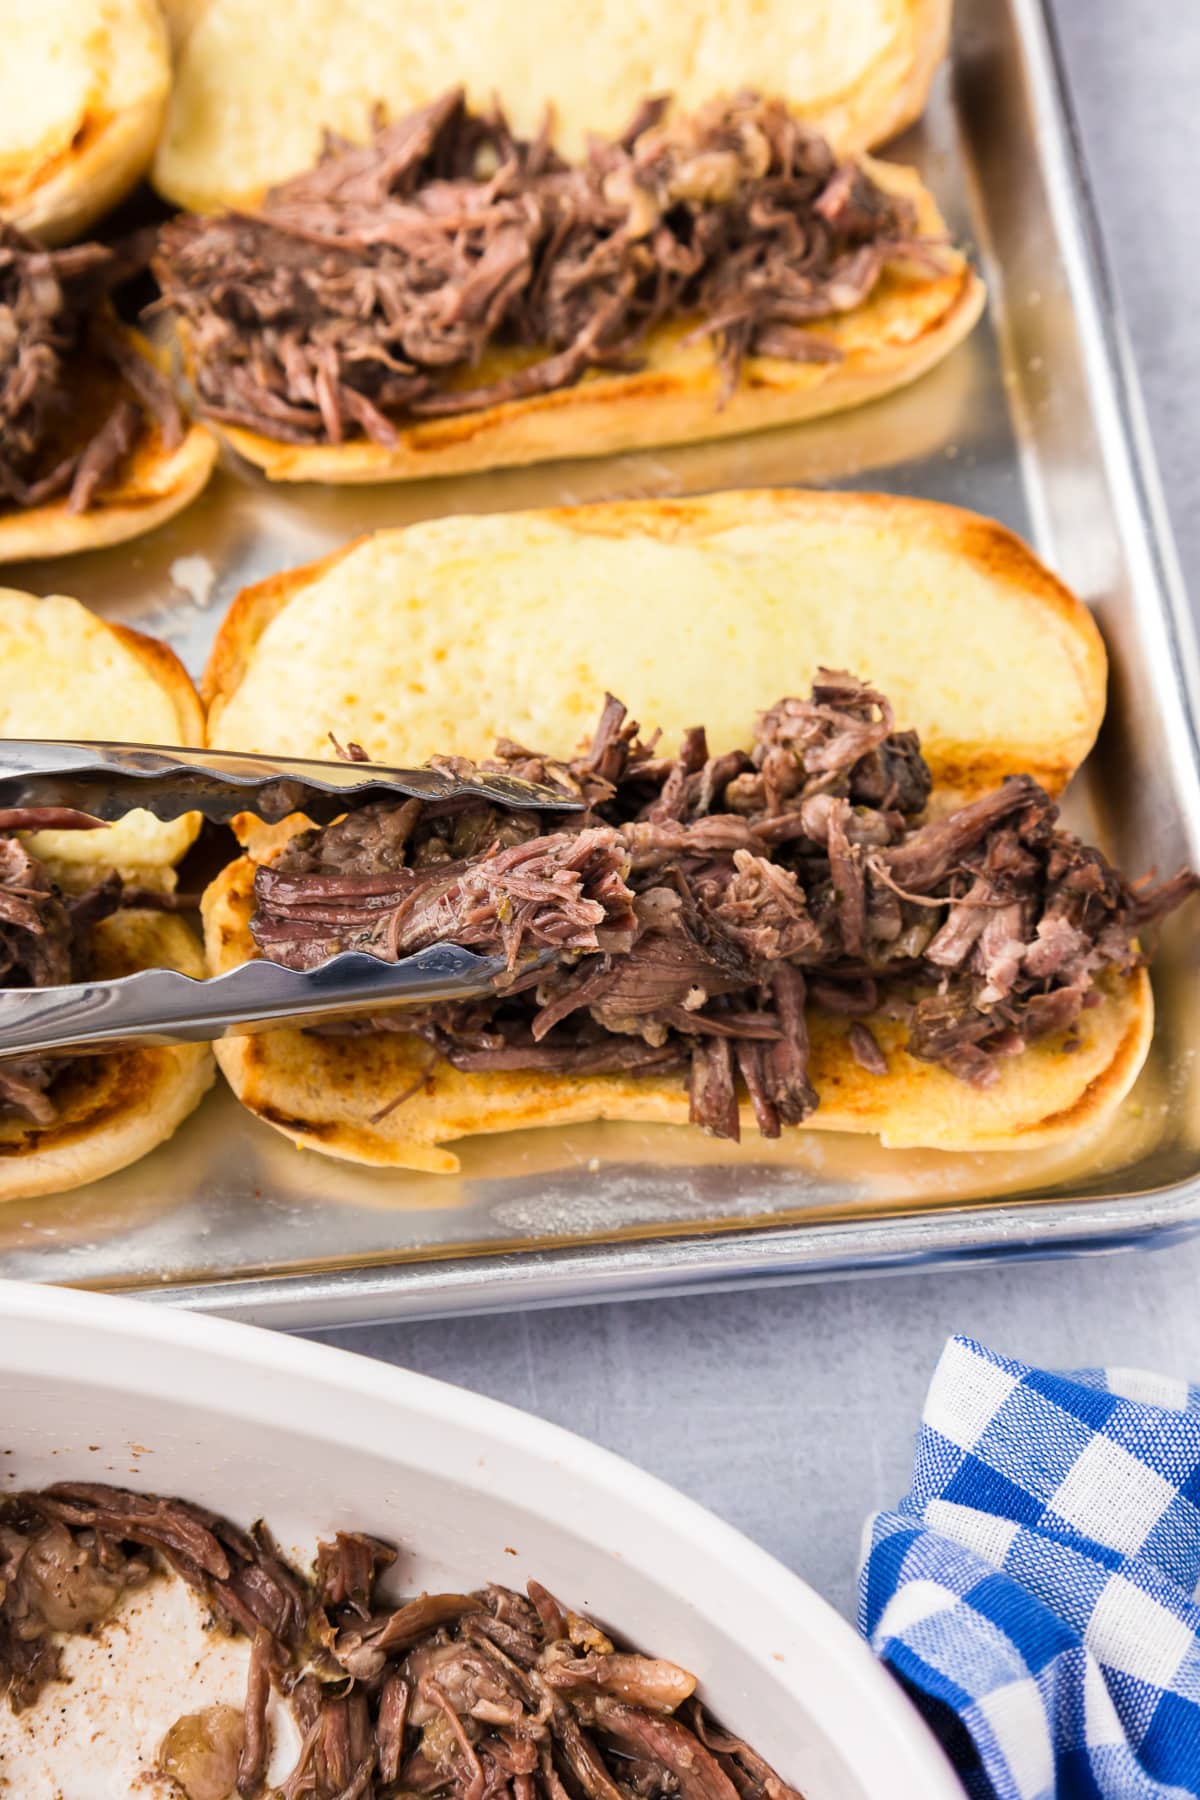 Placing shredded beef on toasted buns on a pan with tongs.